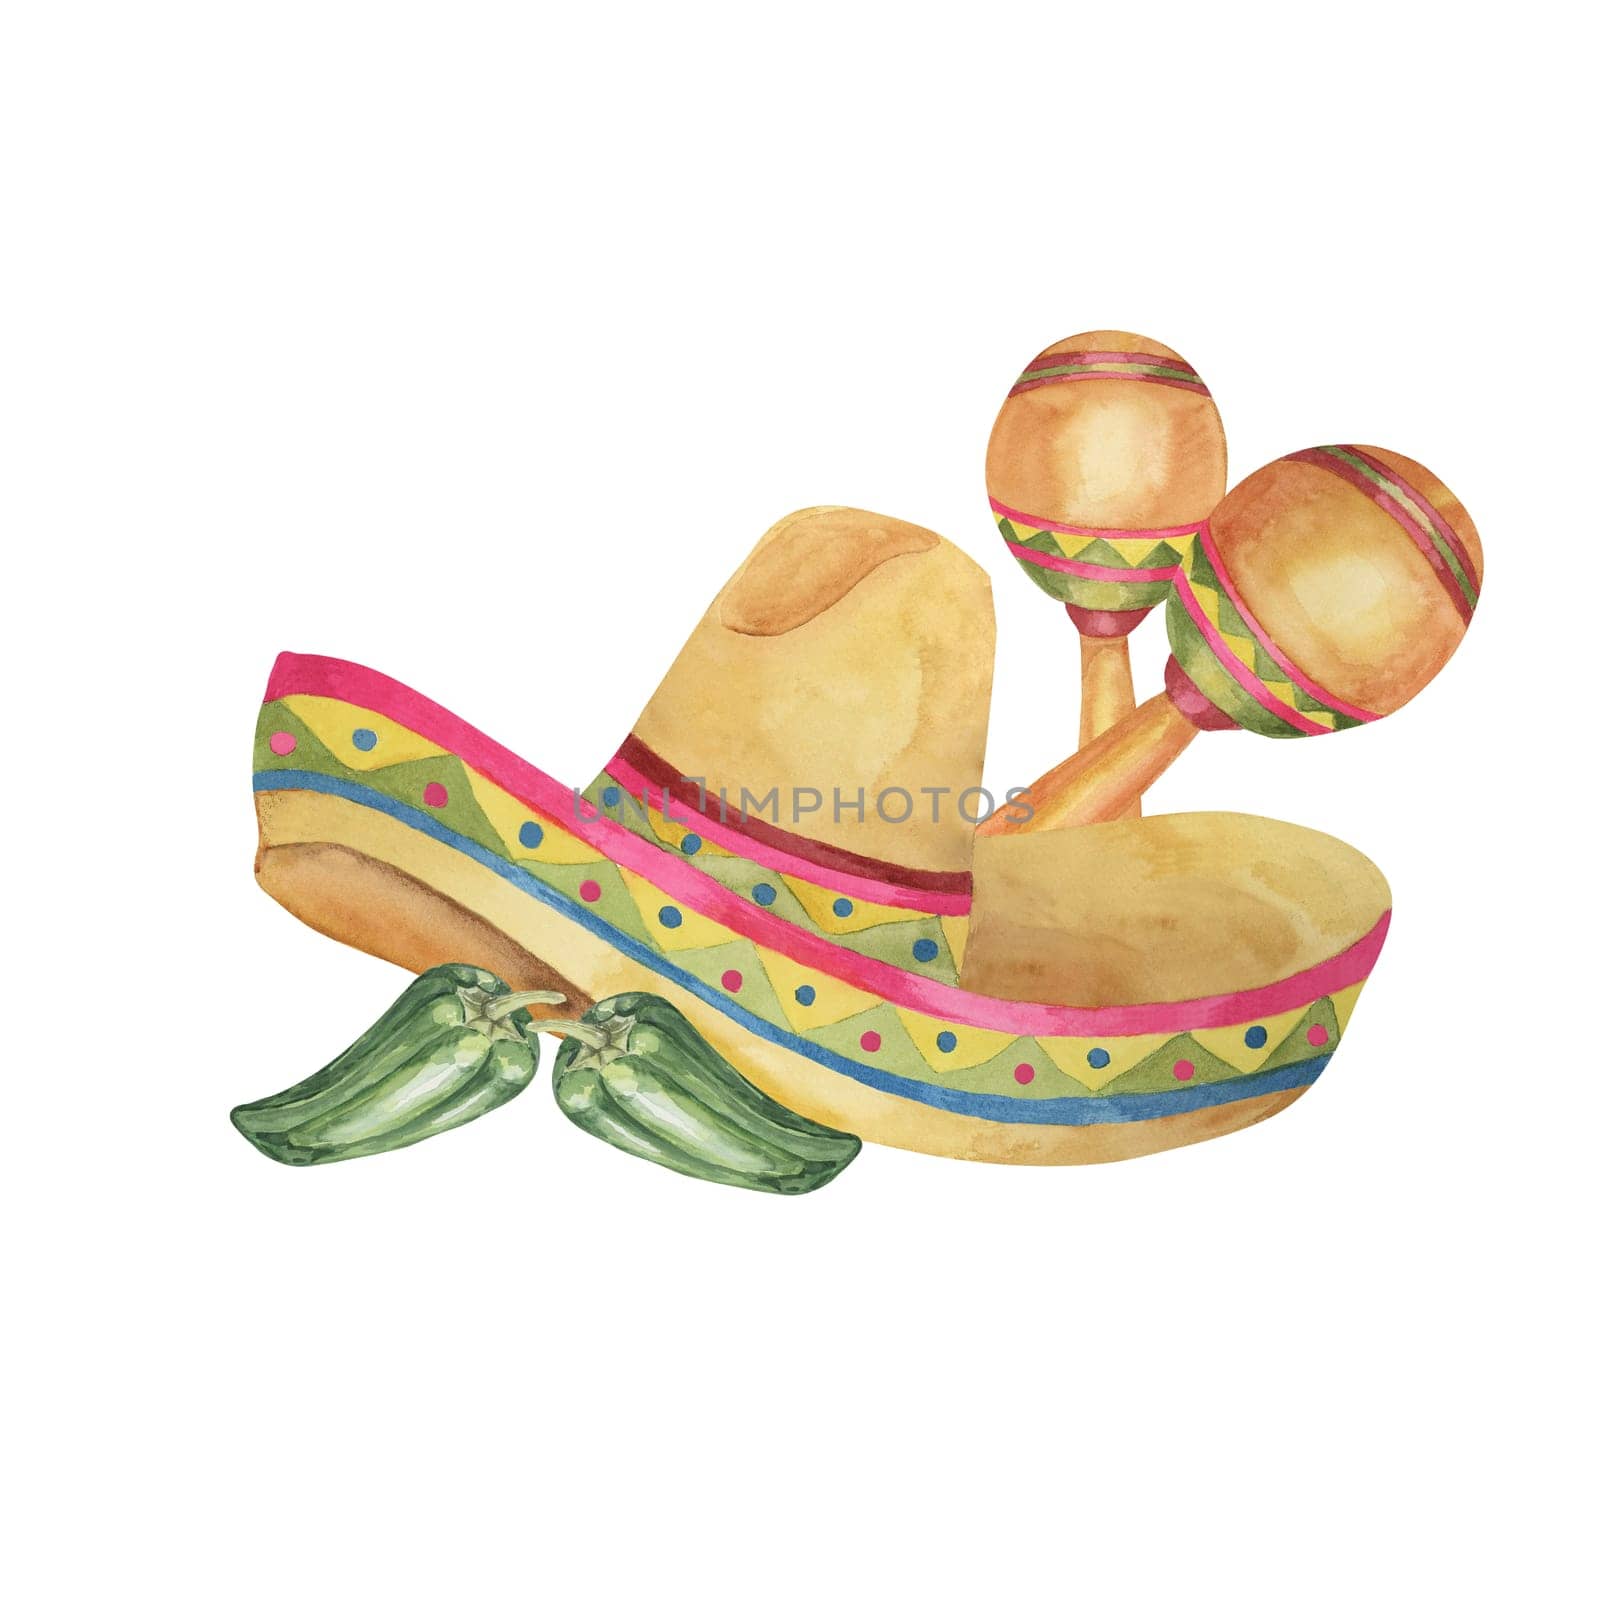 Traditional Mexican sombrero in watercolor. Ethnic hat with maracas and jalapeno. Aquarelle clipart isolated on white background. Design for printing, postcards, Cinco de Mayo, tourism